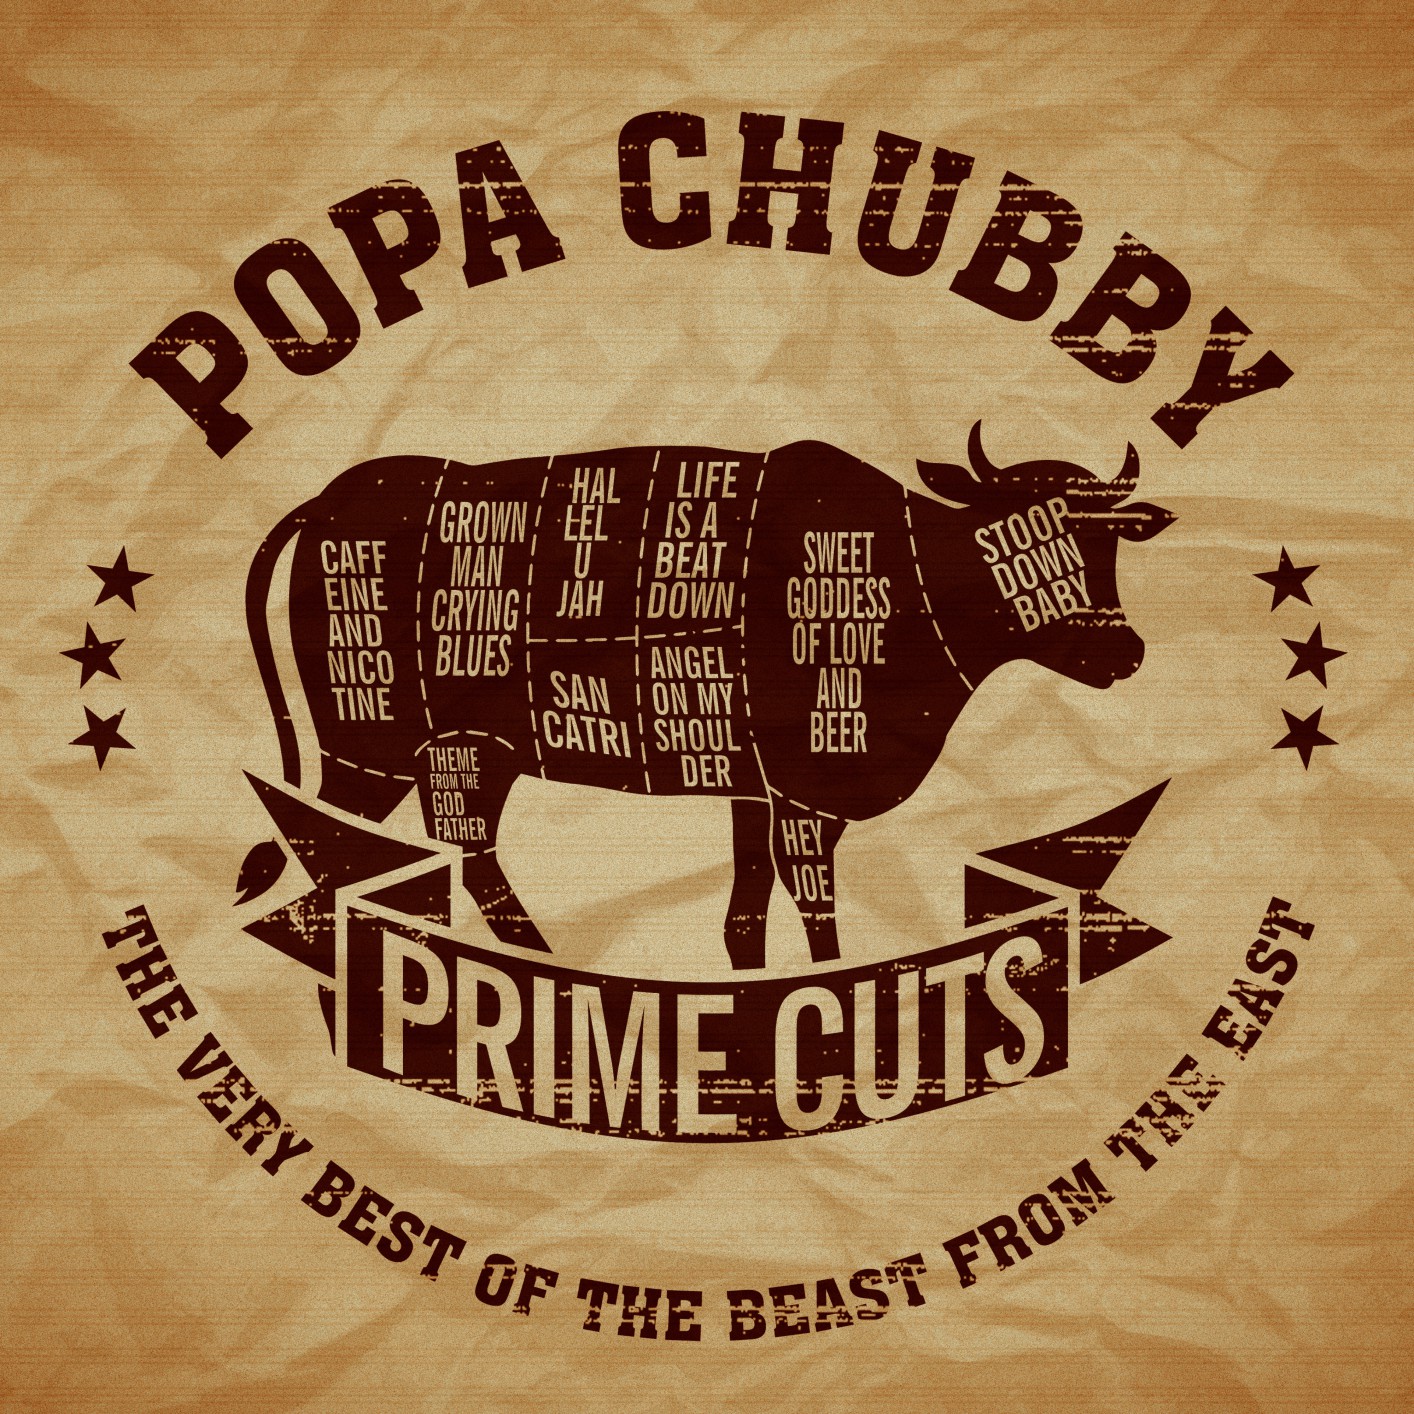 Popa Chubby - Prime Cuts: The Very Best of the Beast from the East (2018) [FLAC 24bit/48kHz]